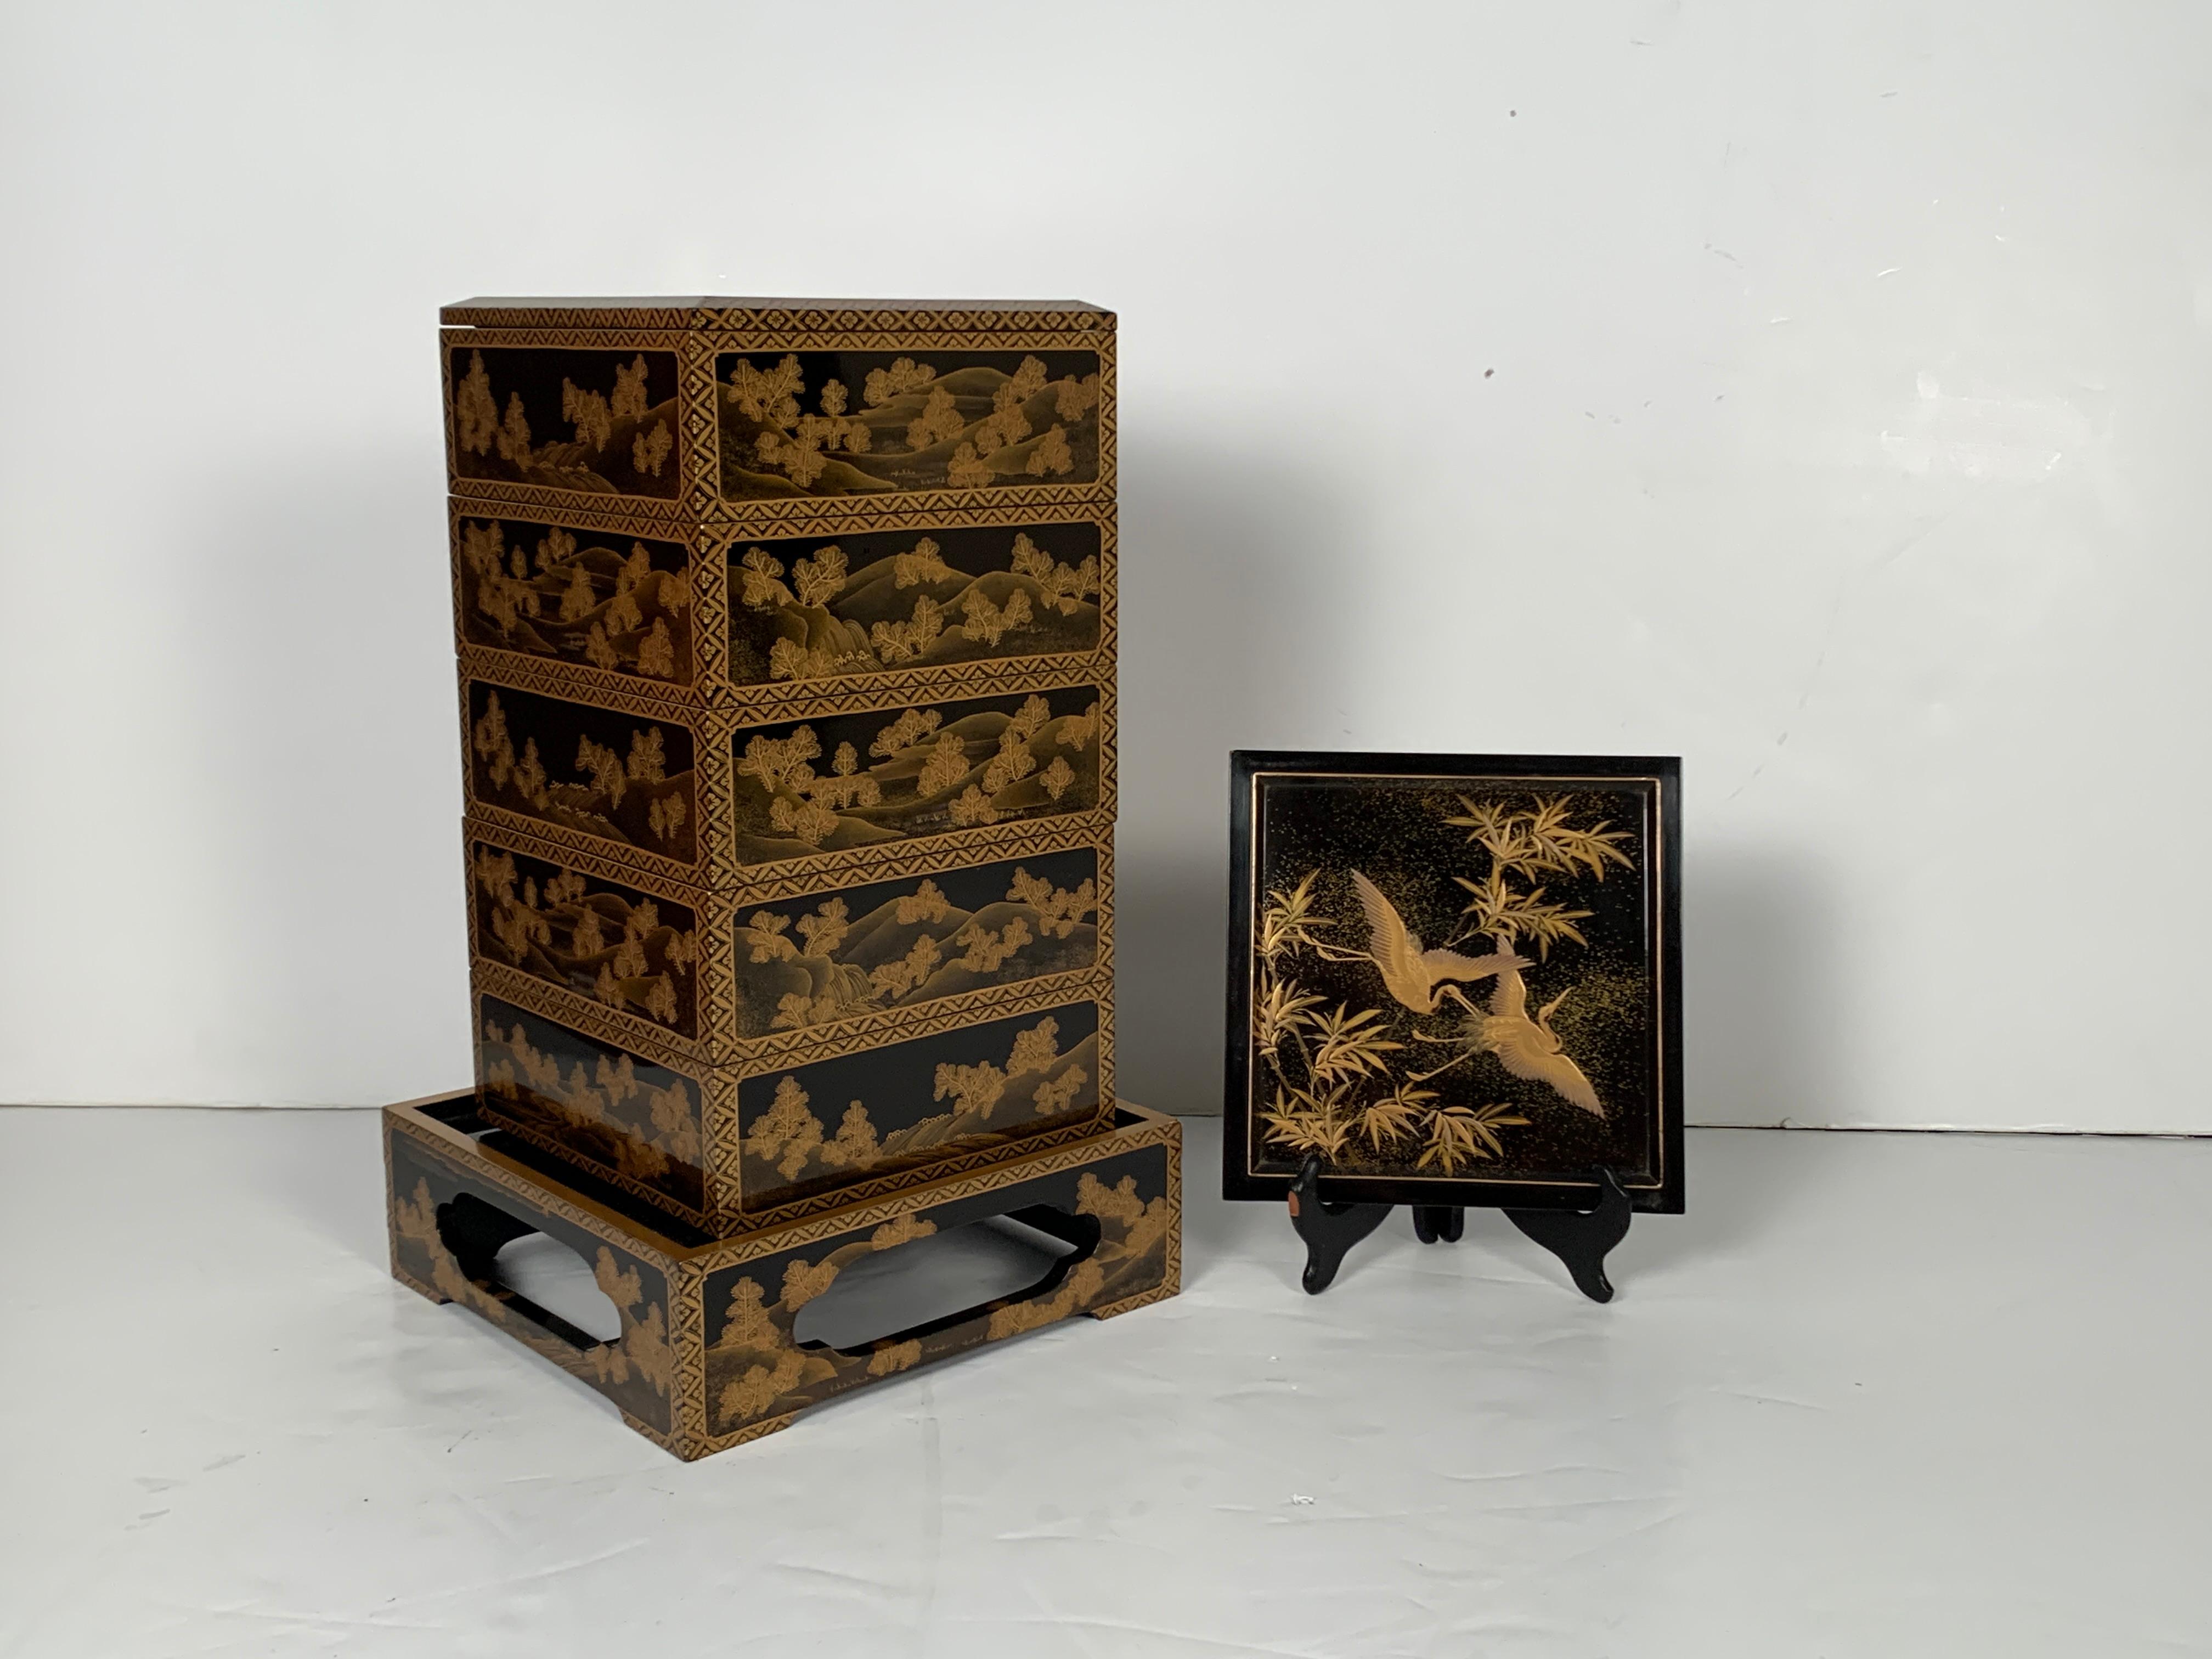 A fine and impressive Japanese gold maki-e decorated black lacquer five-tier jubako with presentation tray, two lids, and the original tomobako storage box, Meiji period, late 19th century, Japan.

The jubako, or stacking box, is sumptuously